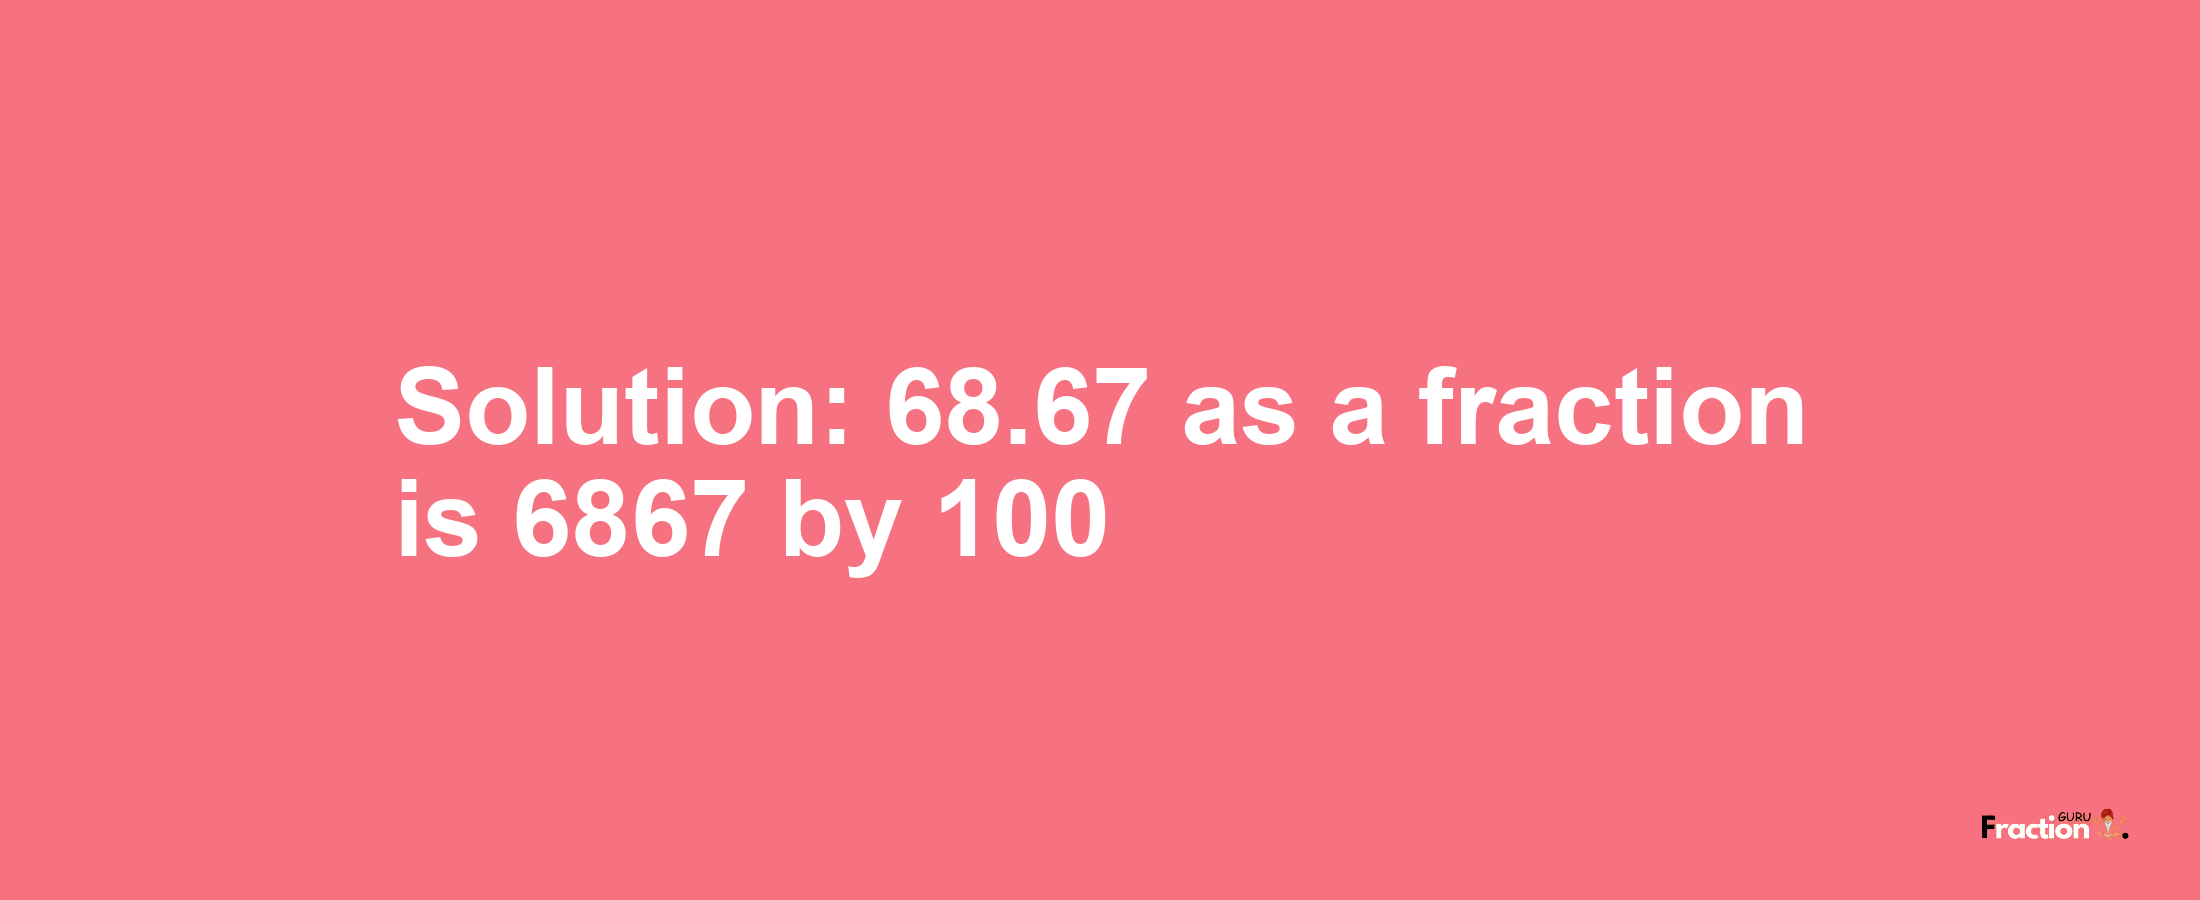 Solution:68.67 as a fraction is 6867/100